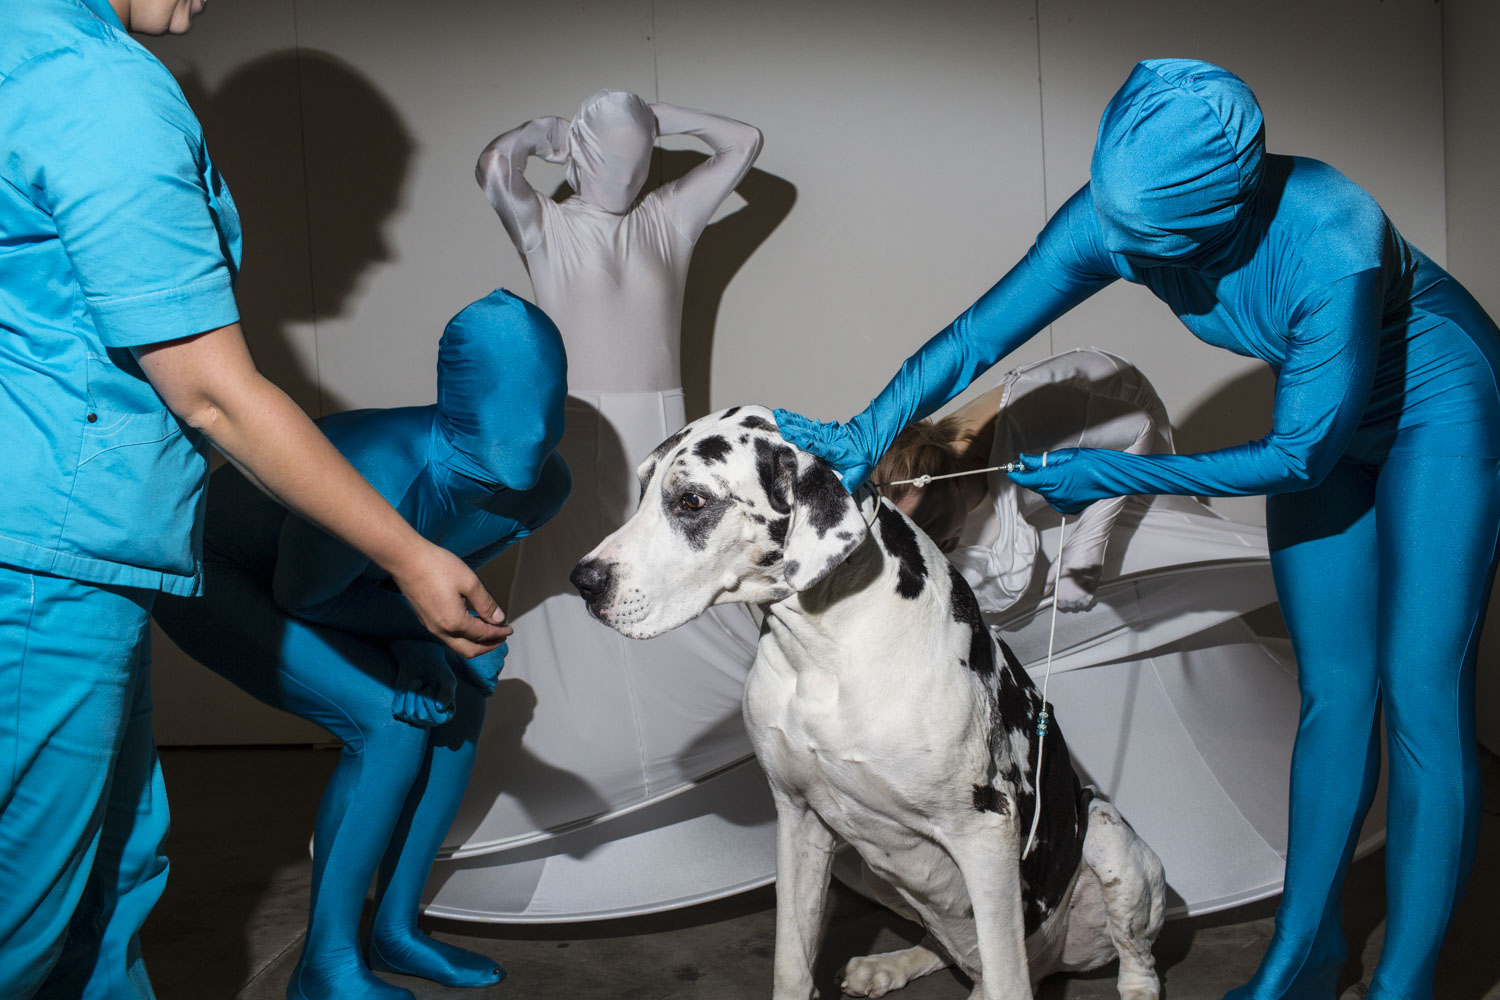 HELSINKI, FINLAND - AUG 8: Kaapo, a 9 year old Great Dane from Finland, meets performers from the Helsinki dance group High Heels backstage during the first day of the 2014 World Dog Show on Friday, August 8th, 2014, in Helsinki, Finland. (Photo by Landon Nordeman)